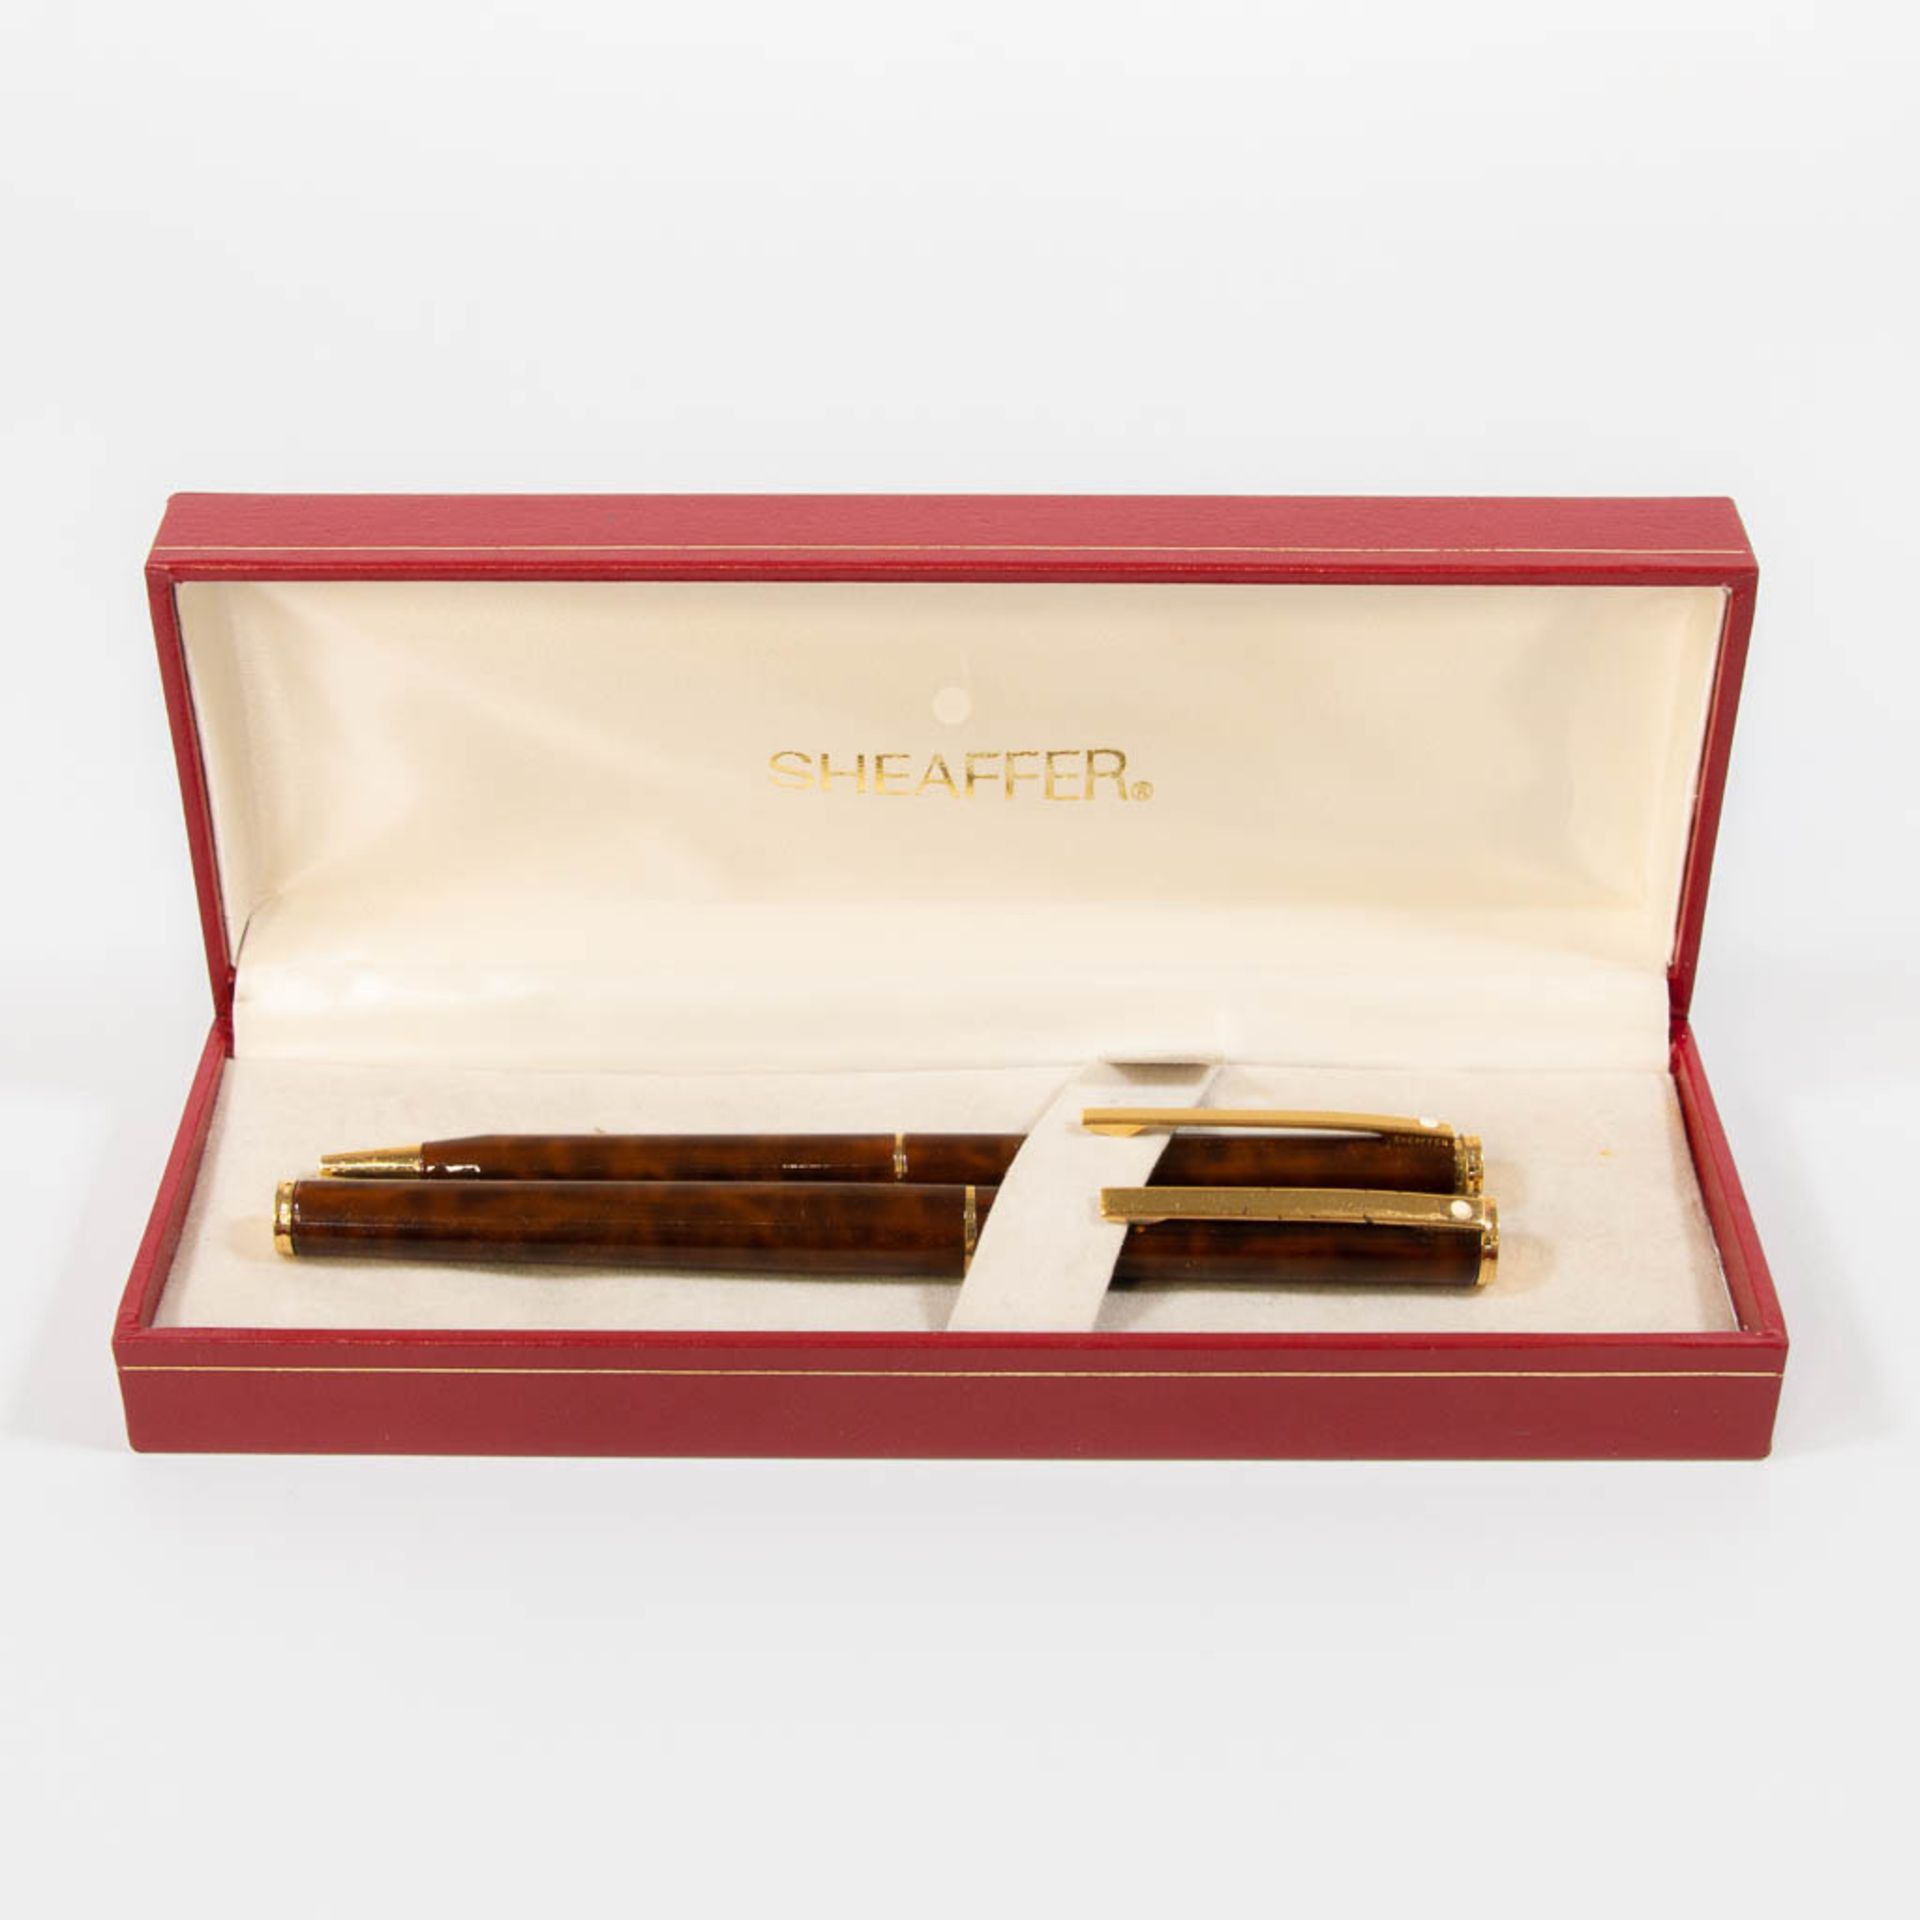 A Sheaffer fountain pen with 18kg gold nib, and a ballpoint pen in their original case. - Image 4 of 11